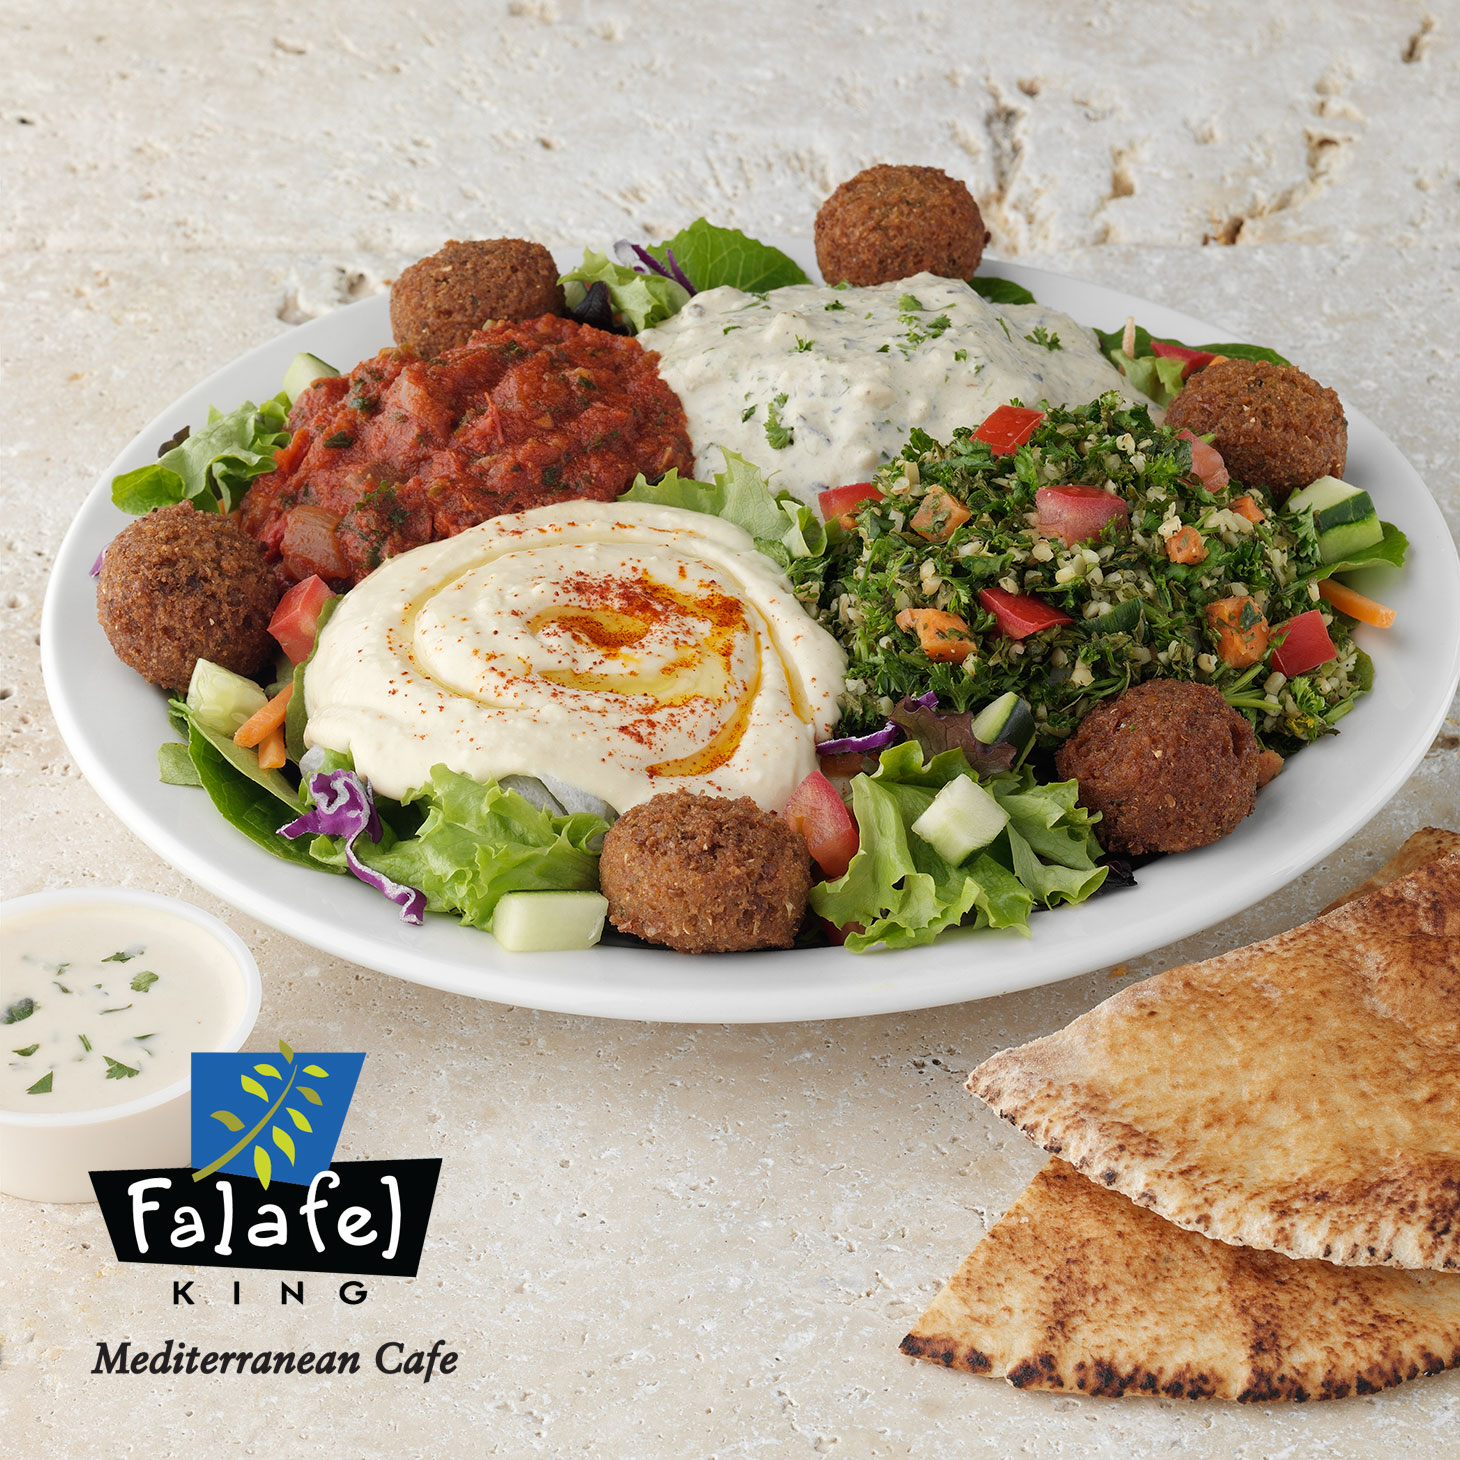 4-by-6 Plate|Falafel balls plus 4 Mediterranean sides. Served with fresh mixed greens & pita.